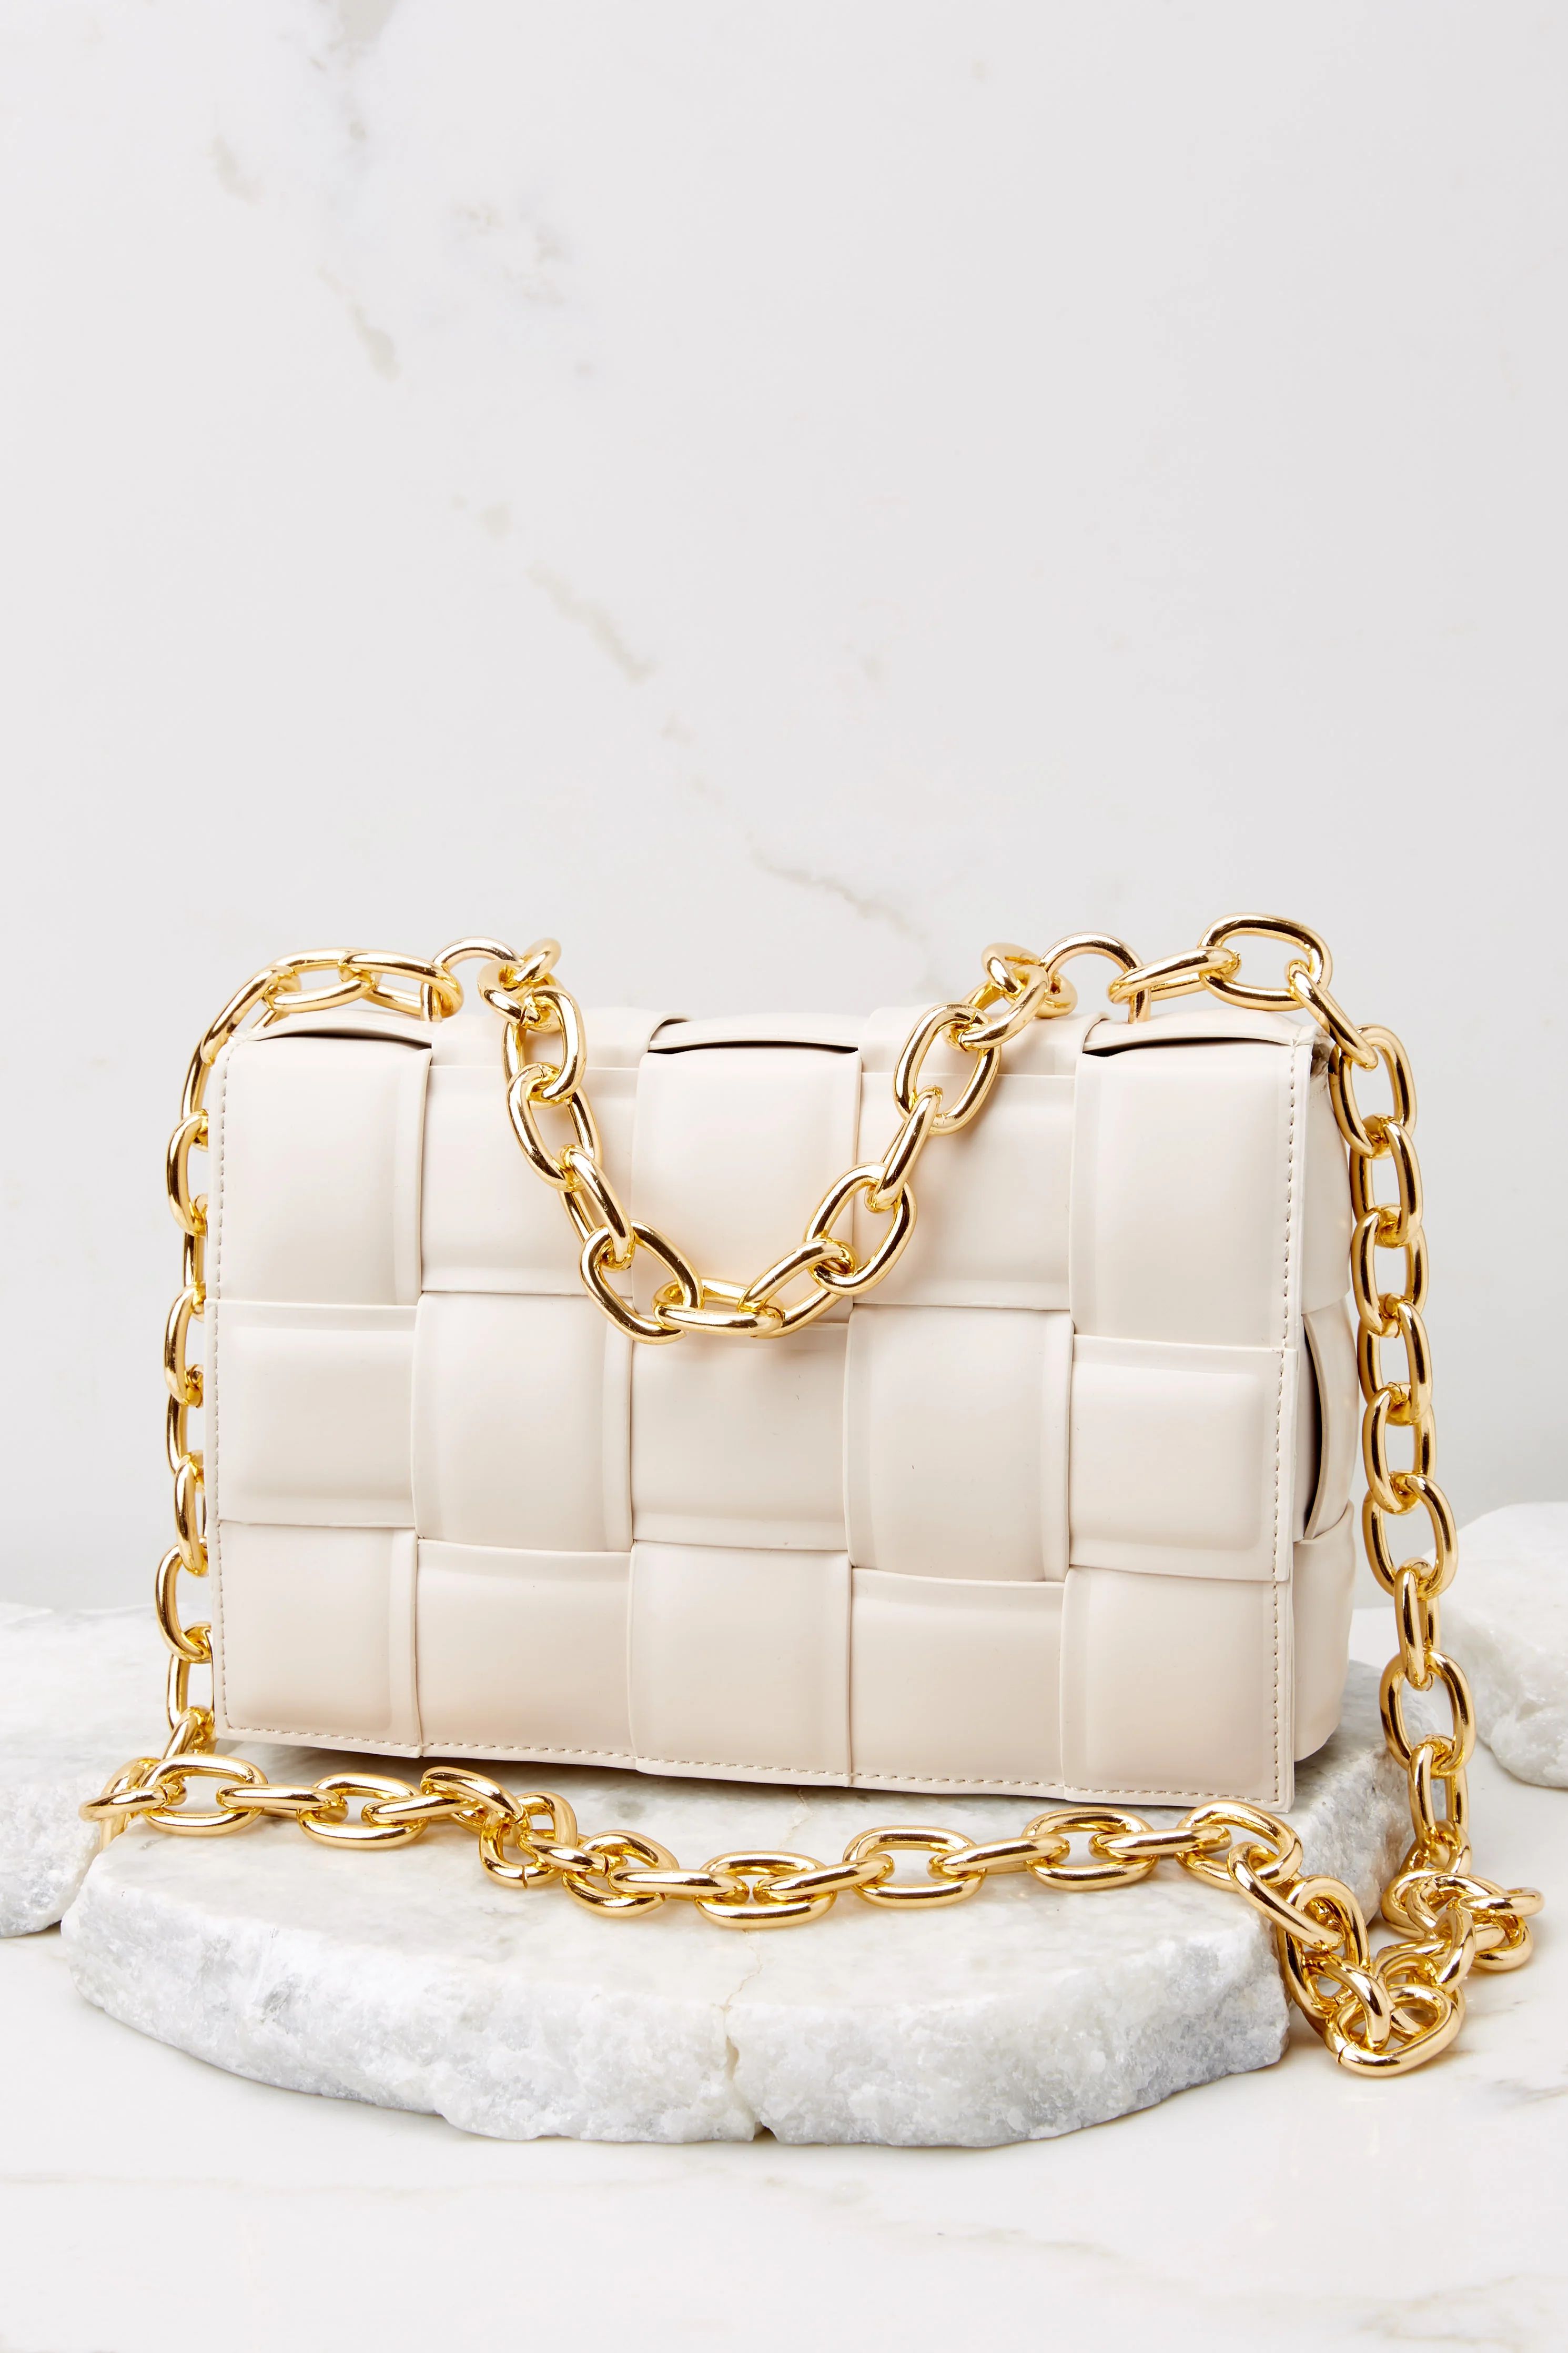 My One And Only Off White Chain Bag | Red Dress 